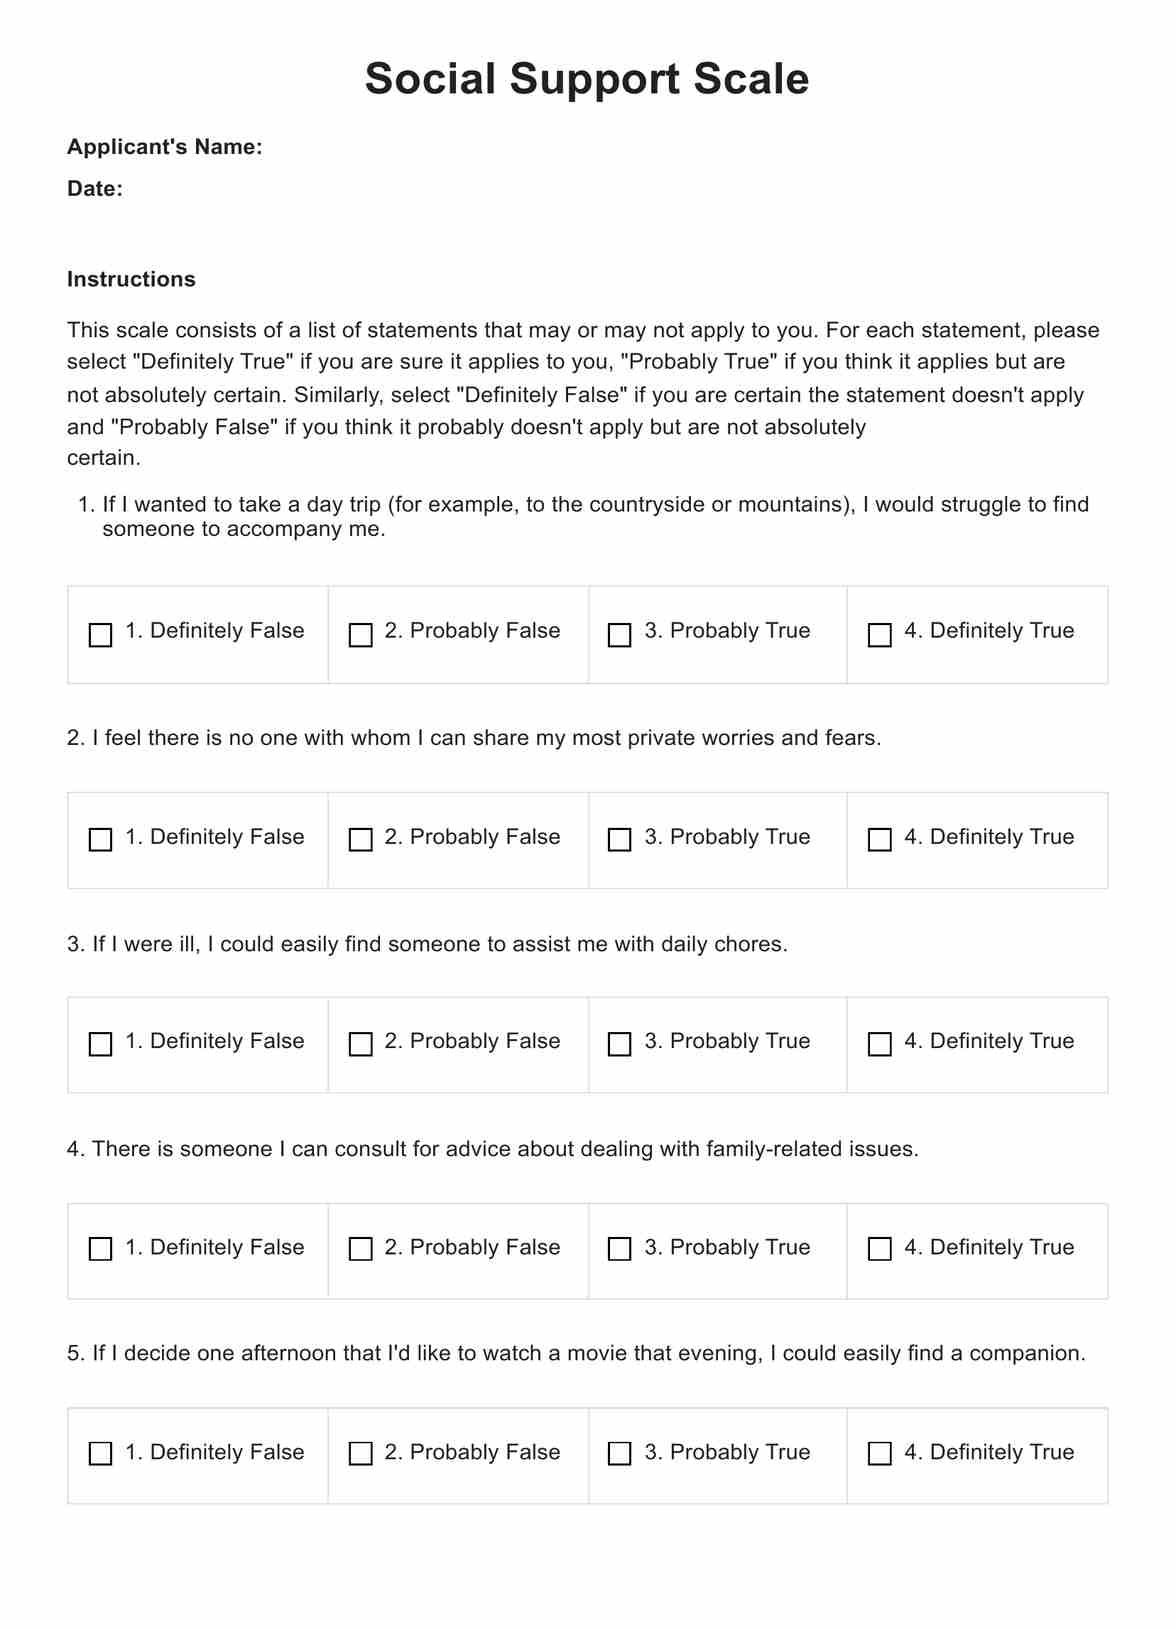 Social Support Scale PDF Example